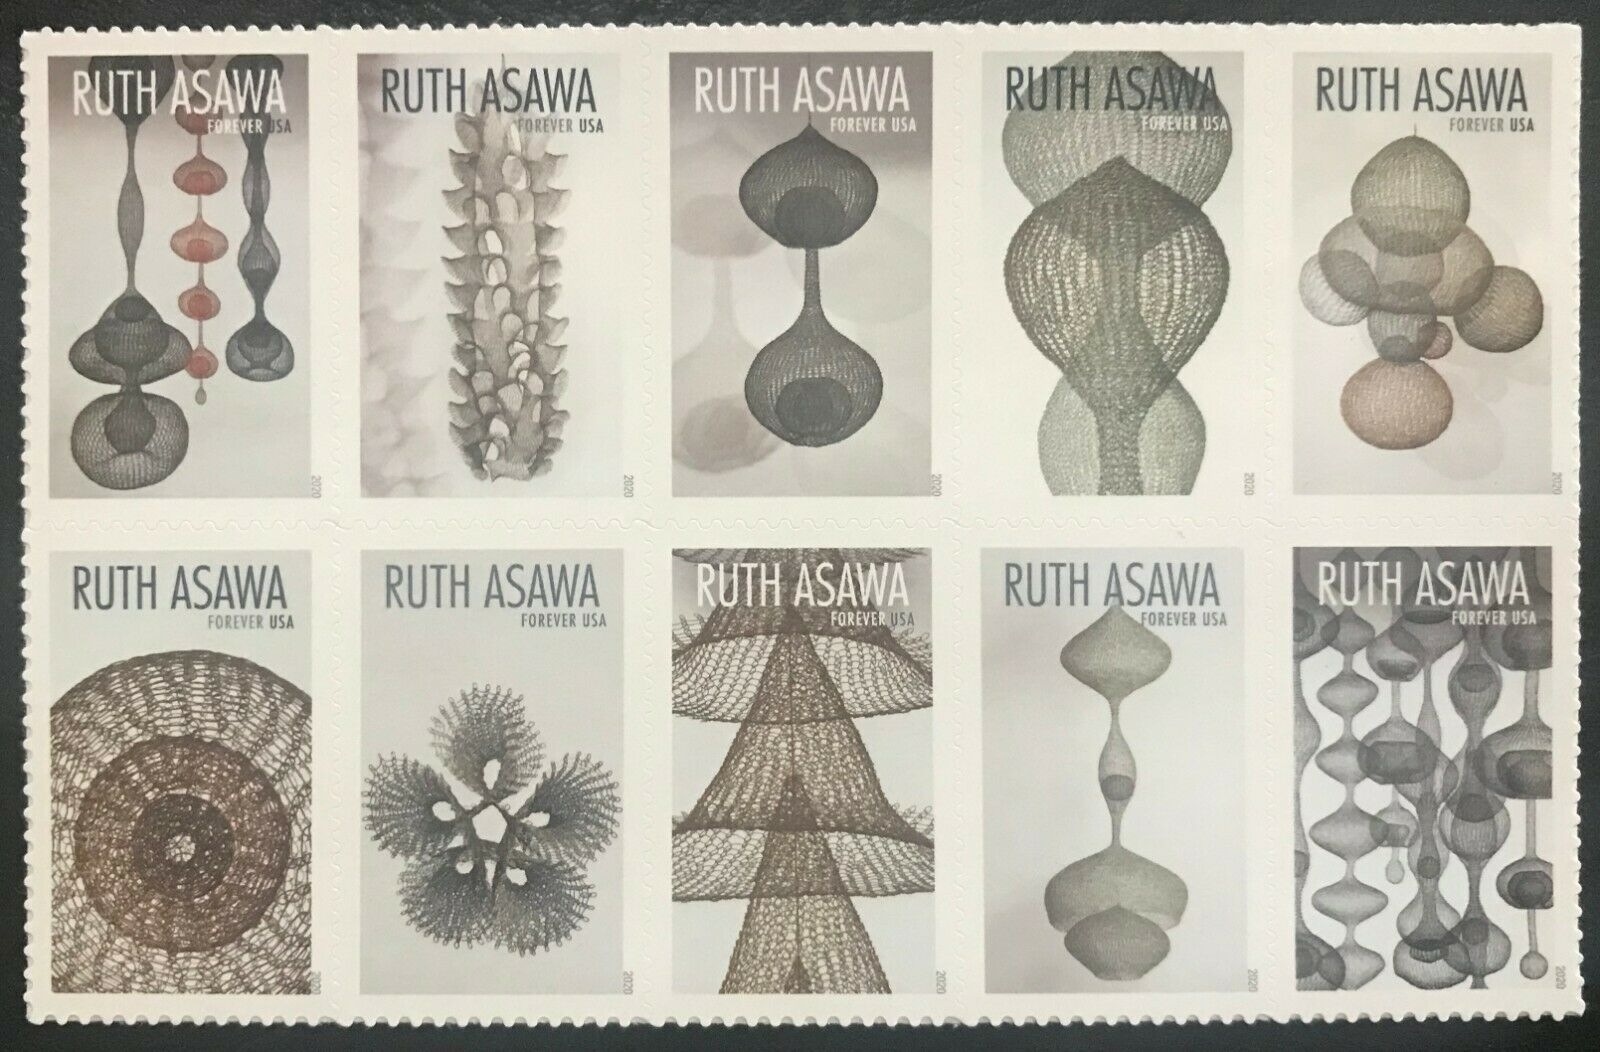 5504-5513  Forever Ruth Asawa Mint Block of 10  #5504-5513blk